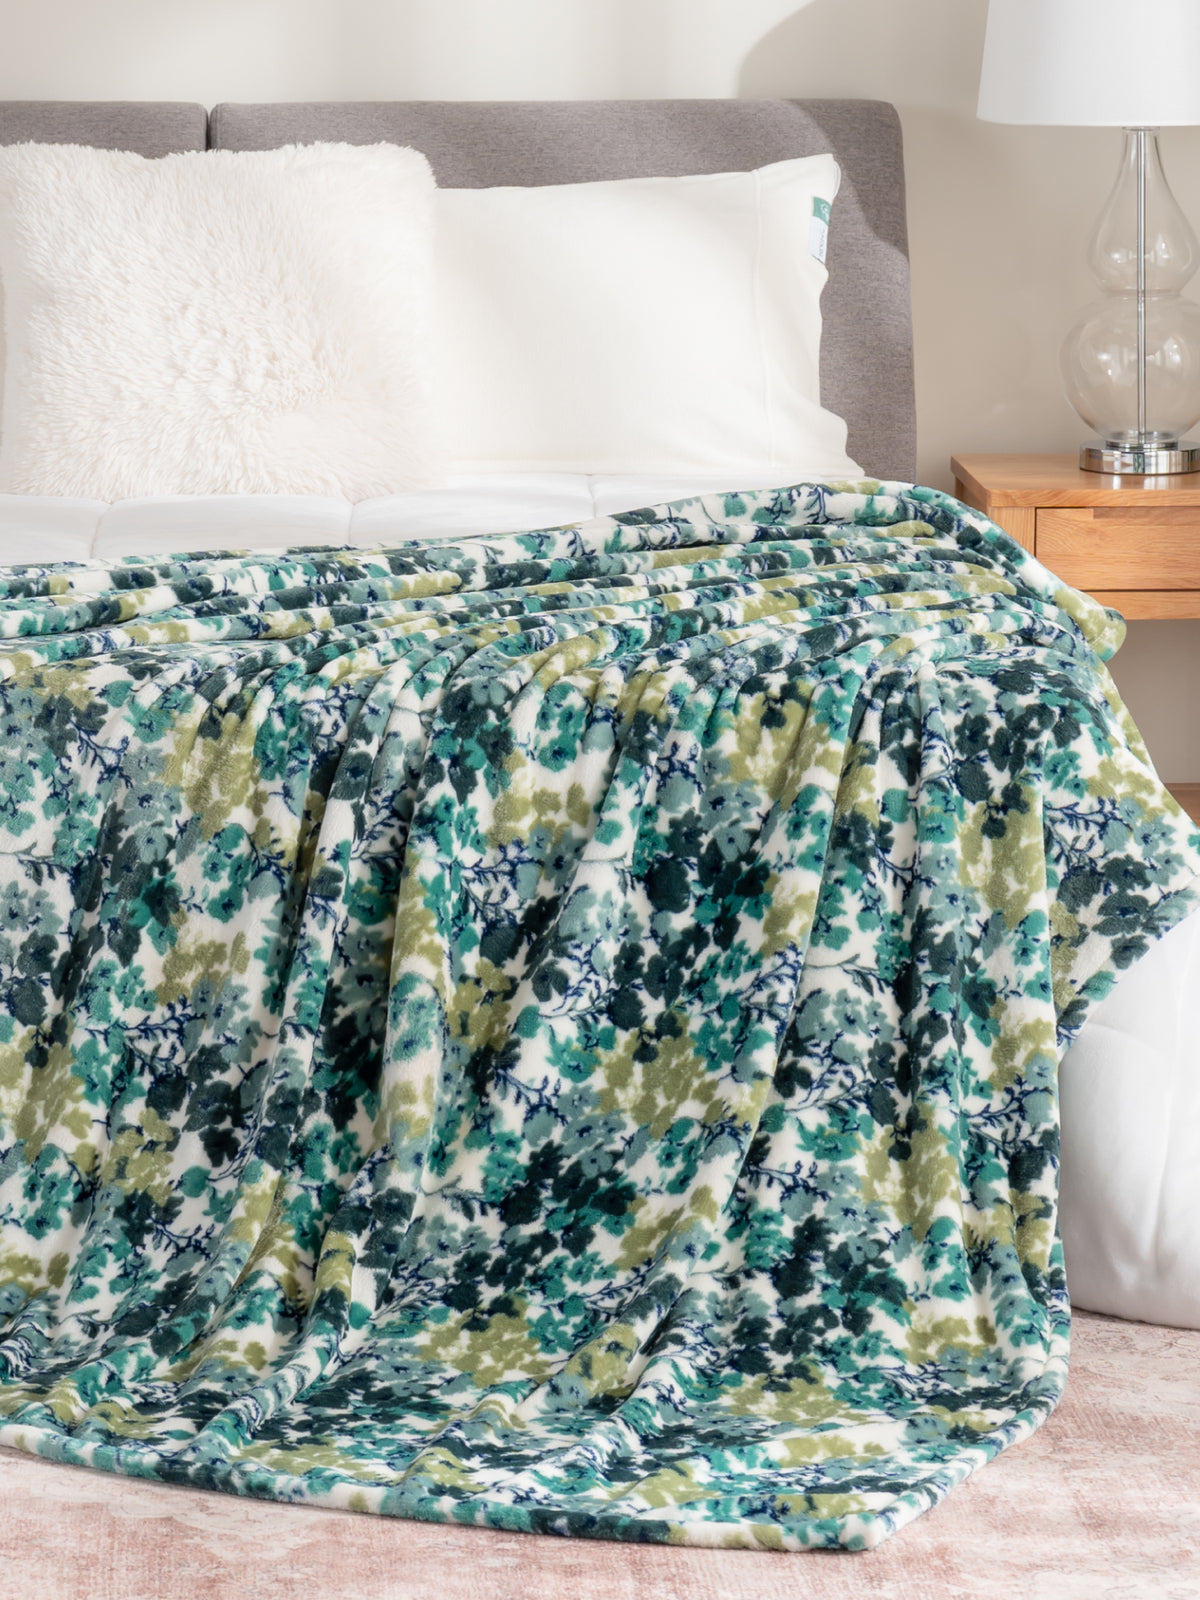 Blankets collection image featuring our floral Printed VelvetLoft Blanket.